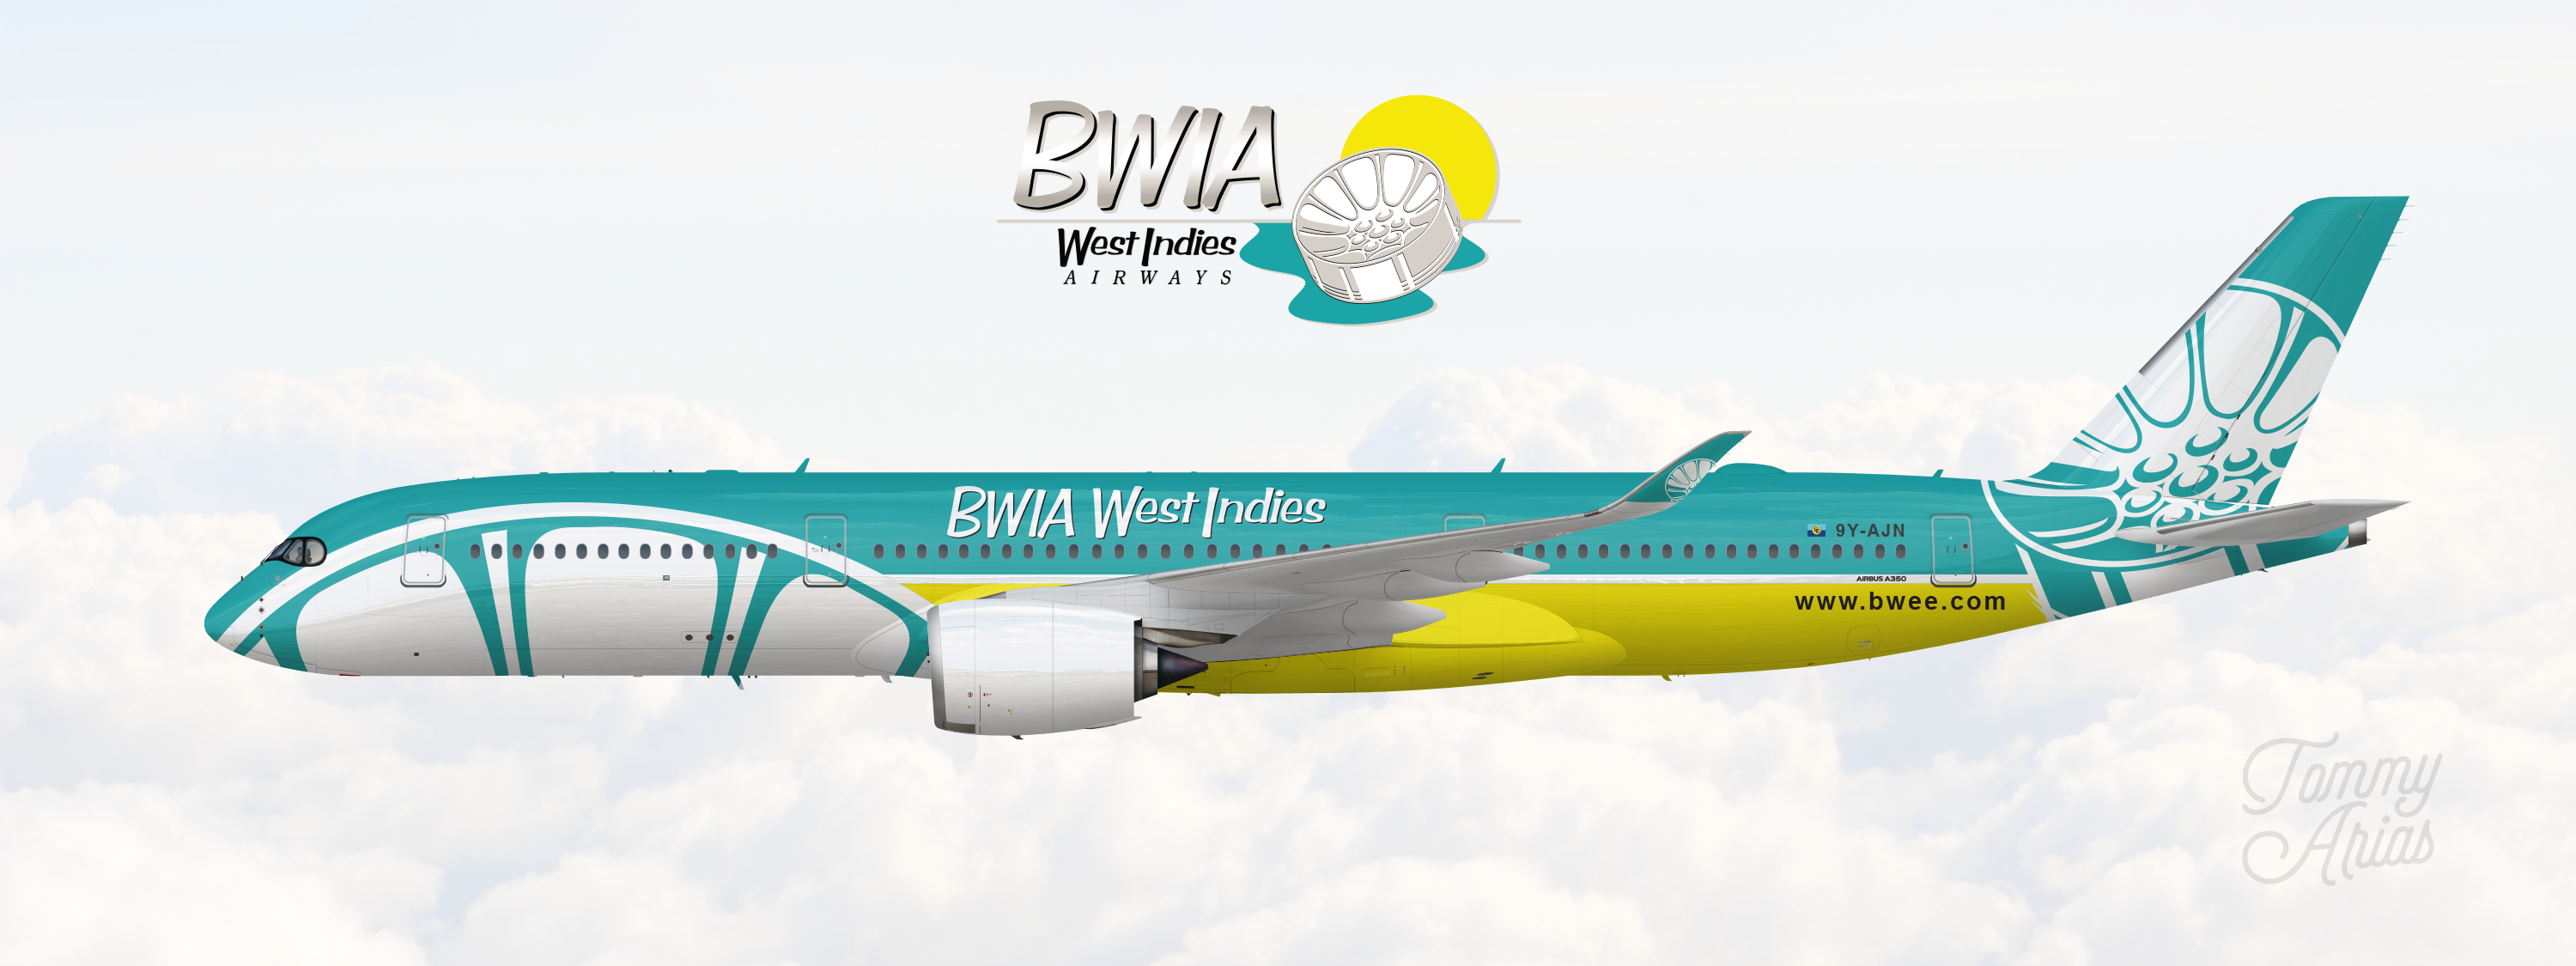 BWIA West Indies Airways / Airbus A350-900 - Real World + Originals -  Gallery - Airline Empires